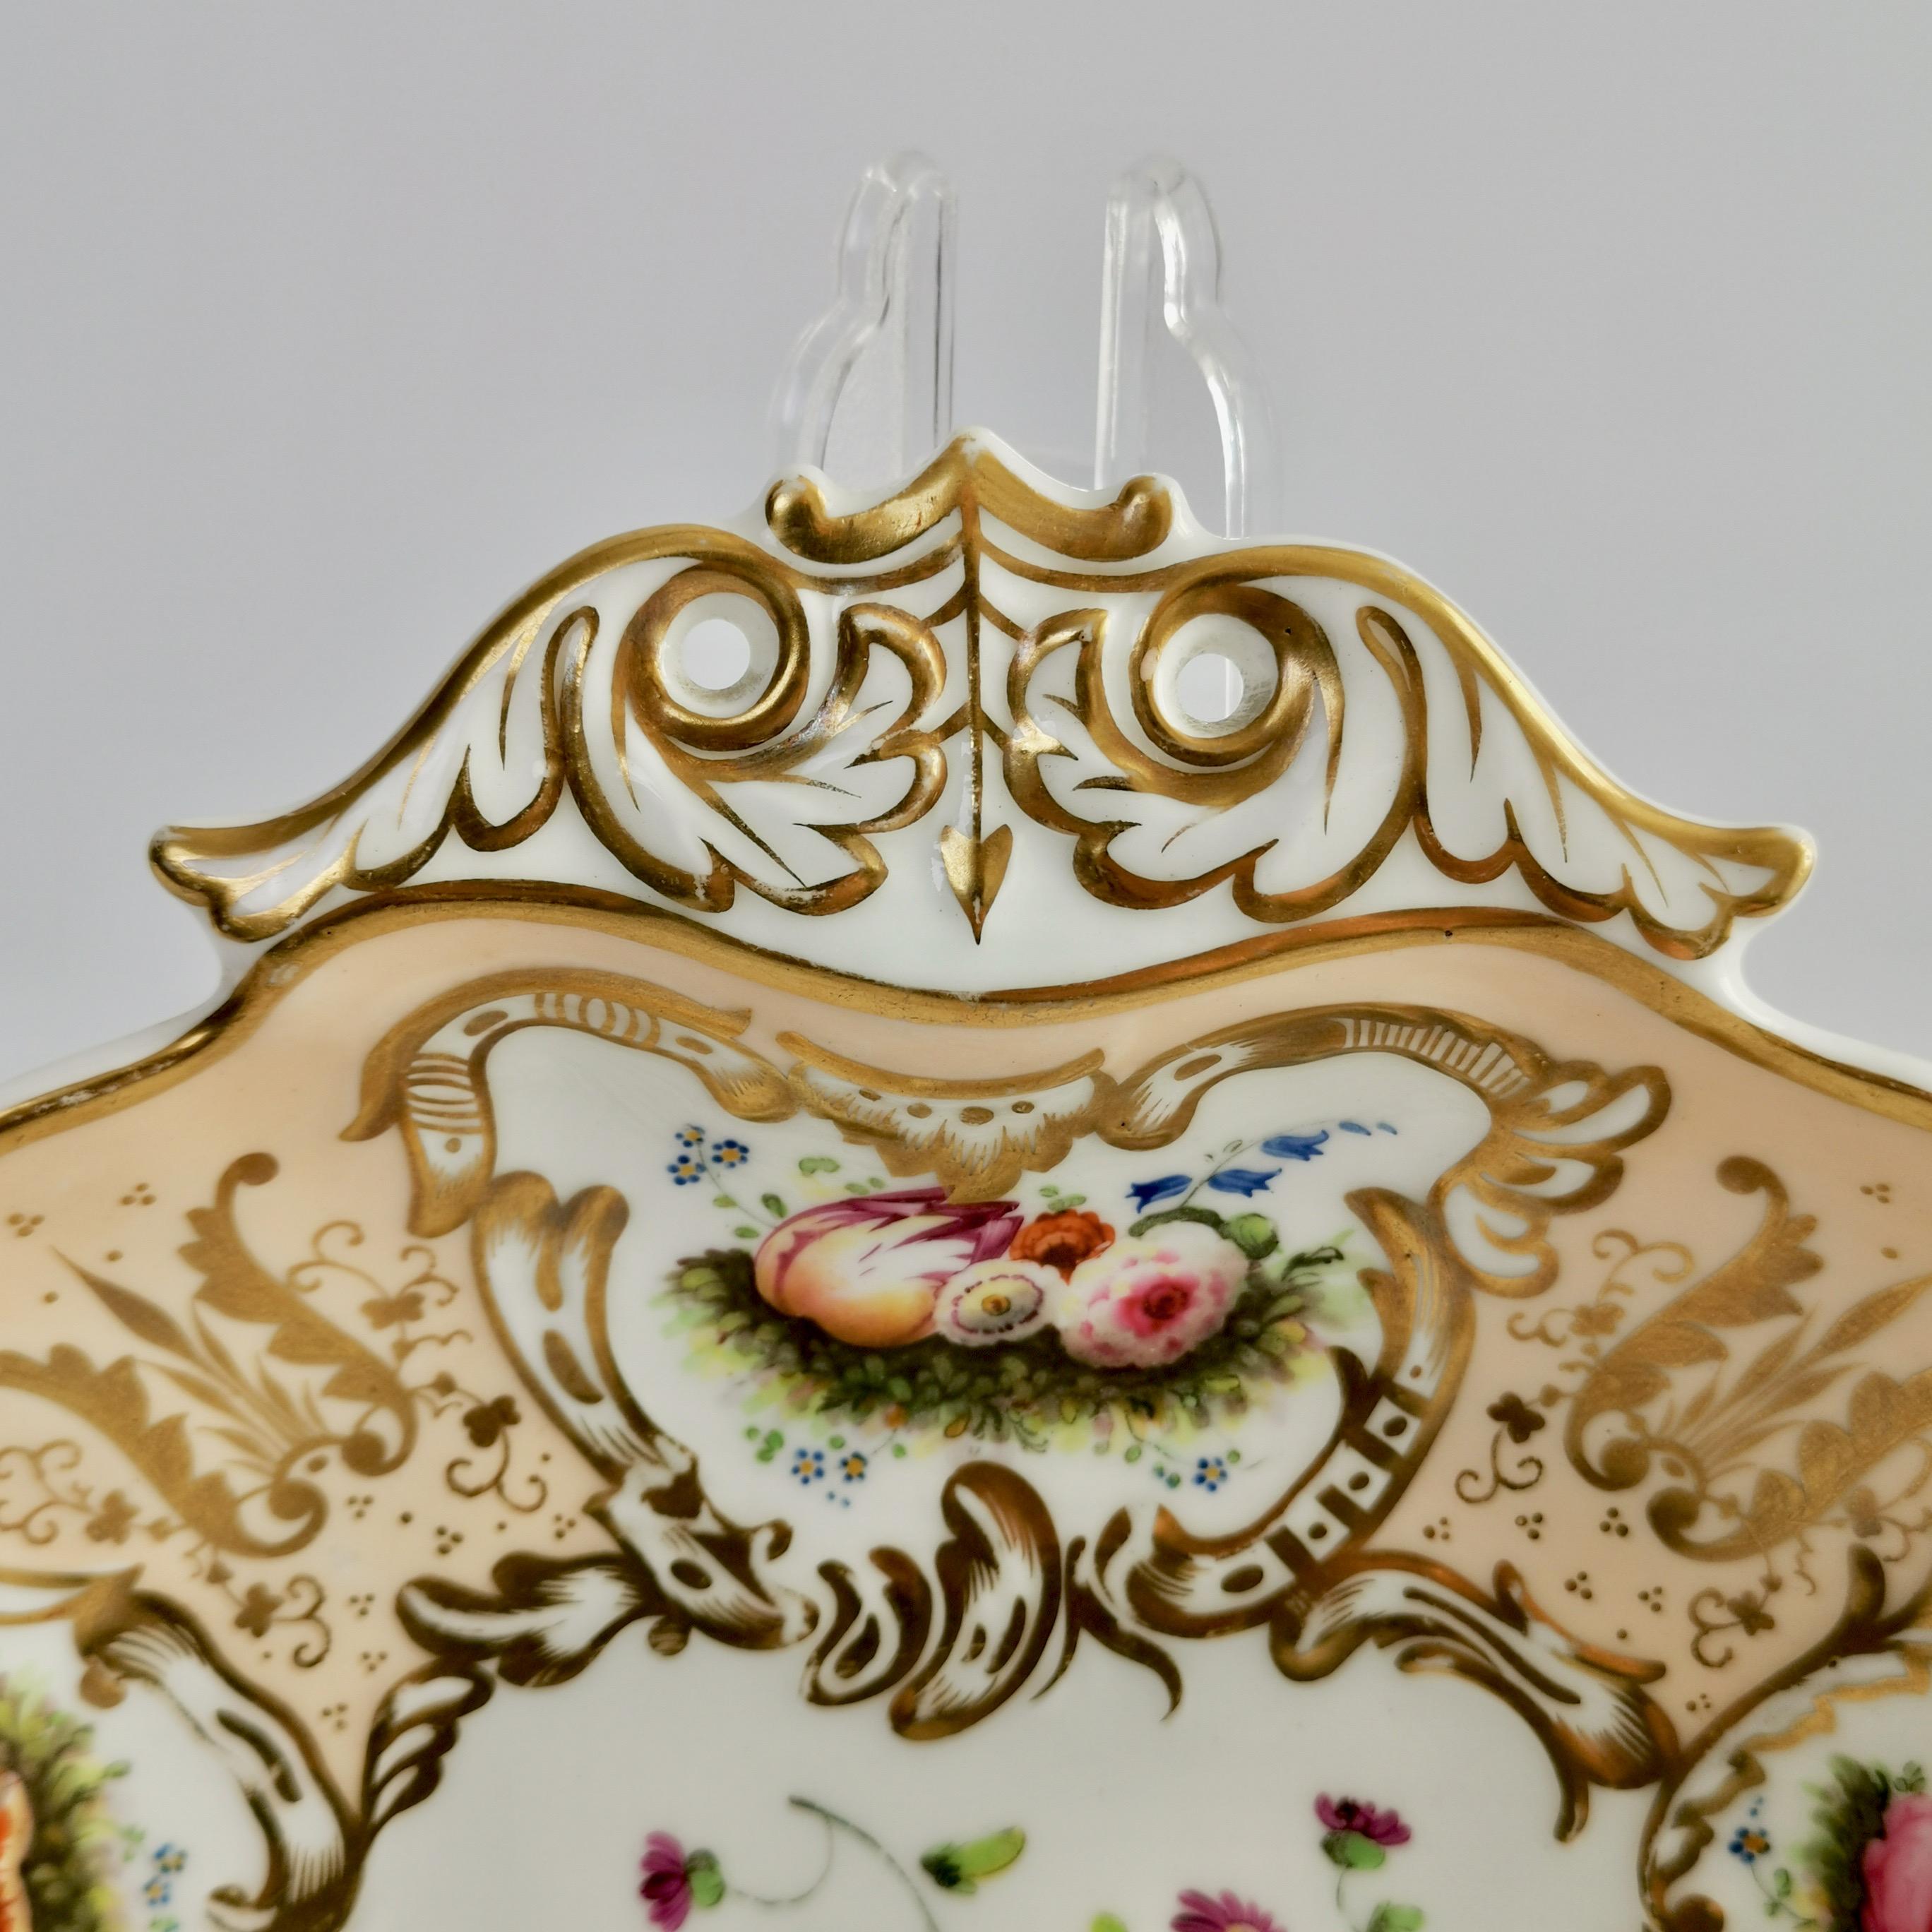 Early Victorian Davenport Porcelain Serving Dish, Salmon, Gilt and Flowers, circa 1830